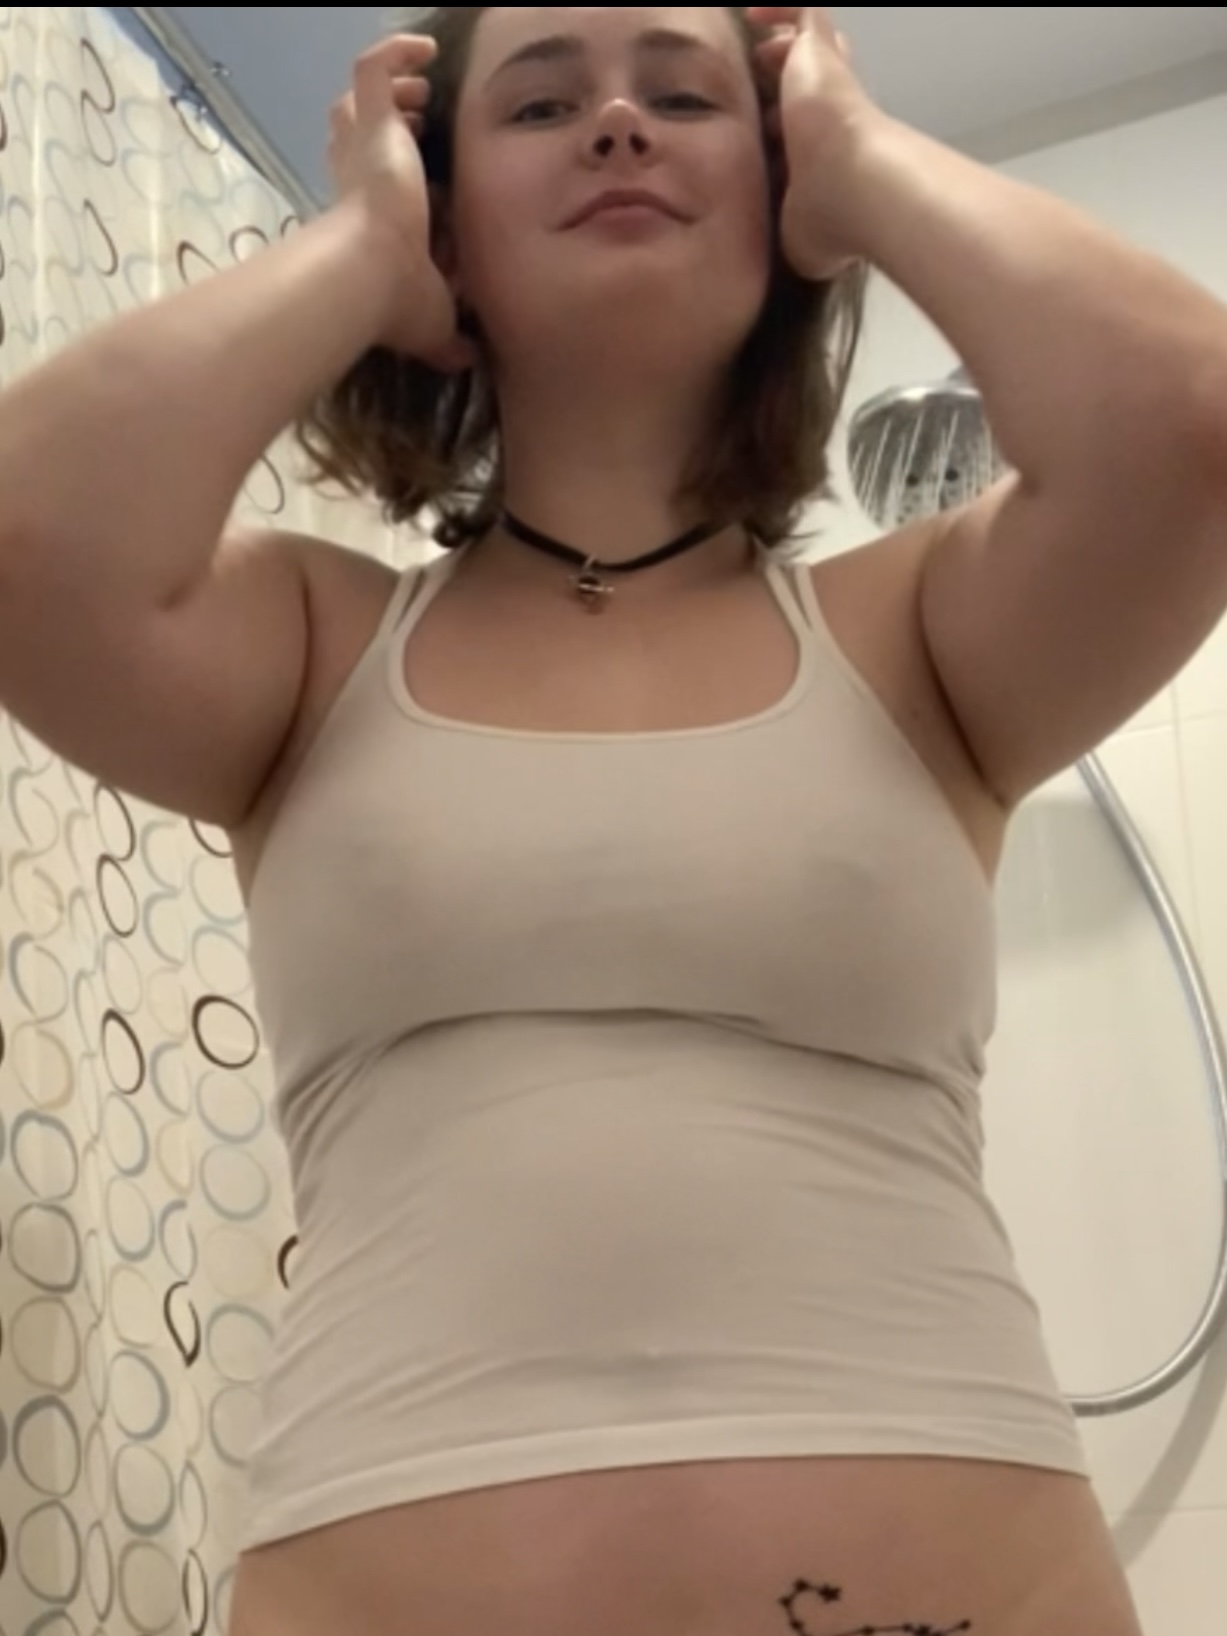 Dasha plays with herself in the shower